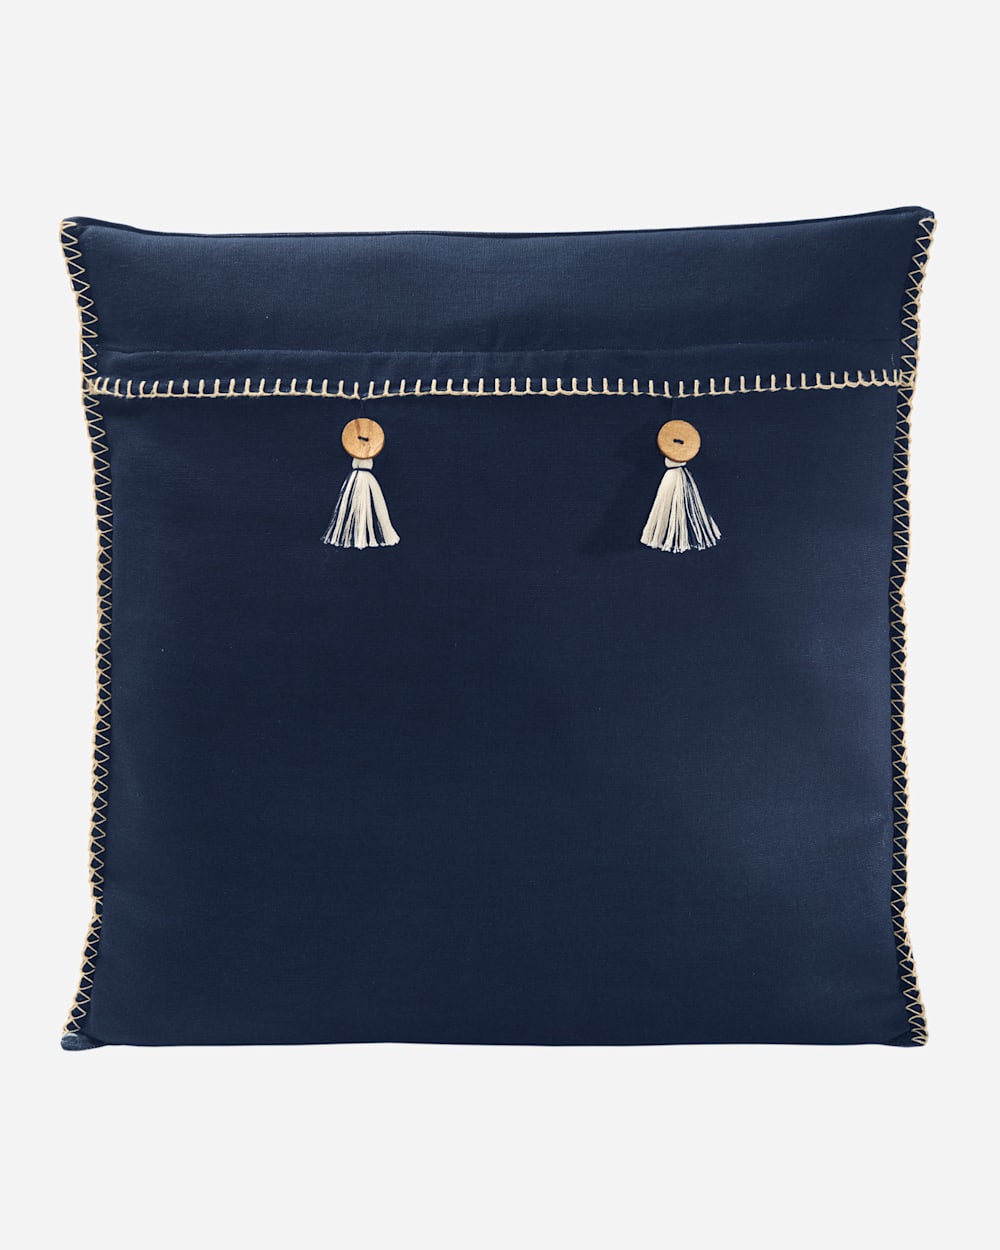 ADDITIONAL VIEW OF HARDING SQUARE PILLOW IN NAVY MULTI image number 2